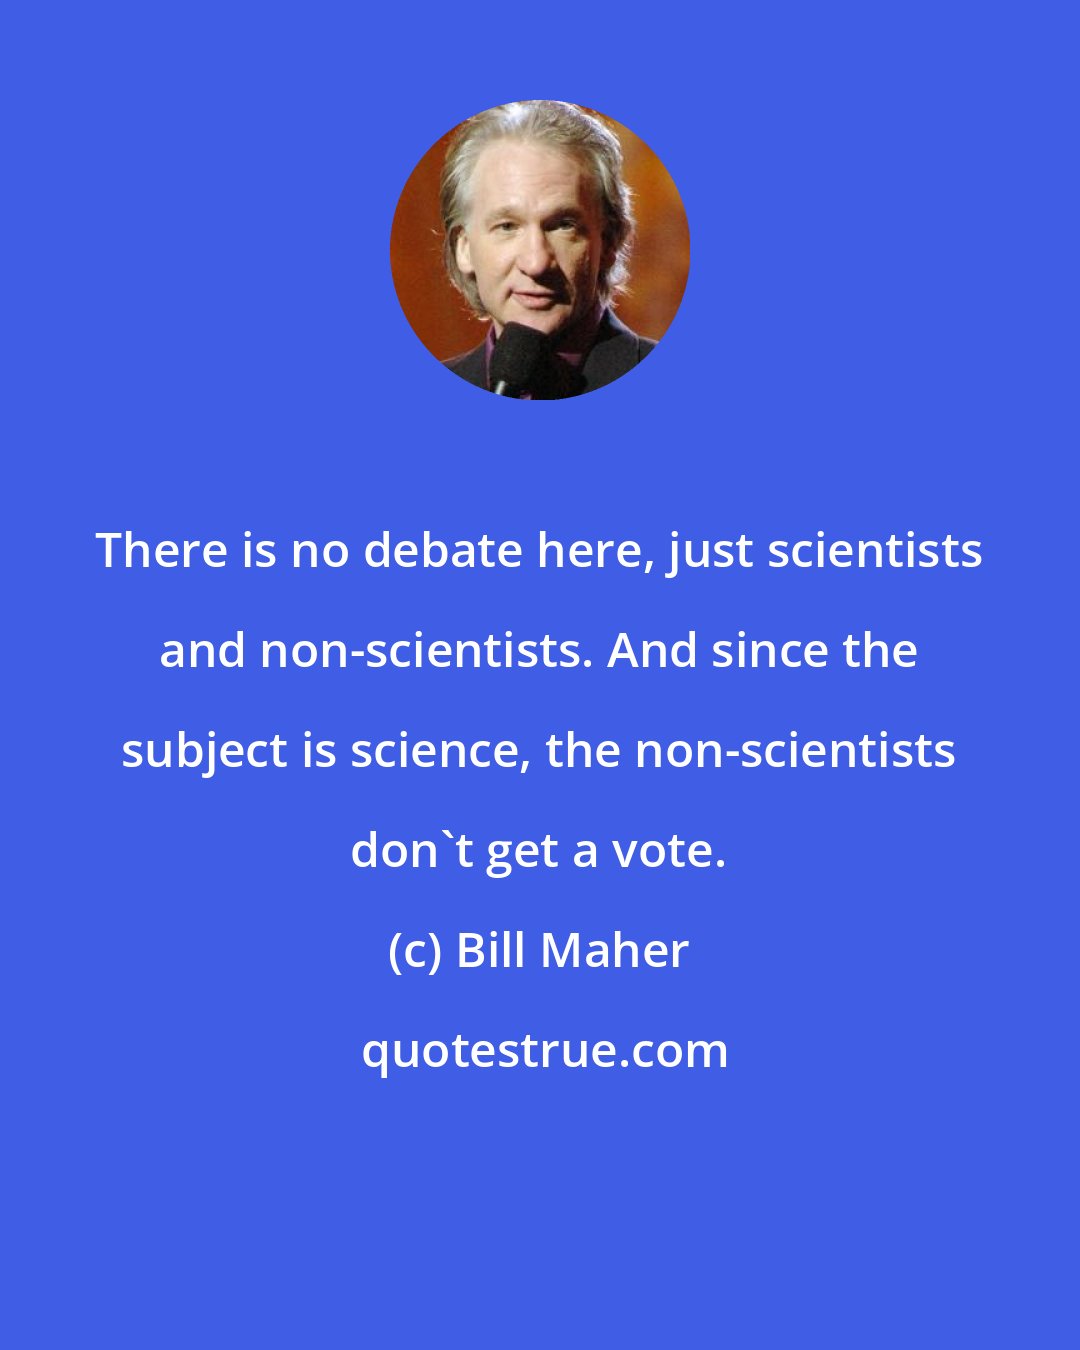 Bill Maher: There is no debate here, just scientists and non-scientists. And since the subject is science, the non-scientists don't get a vote.